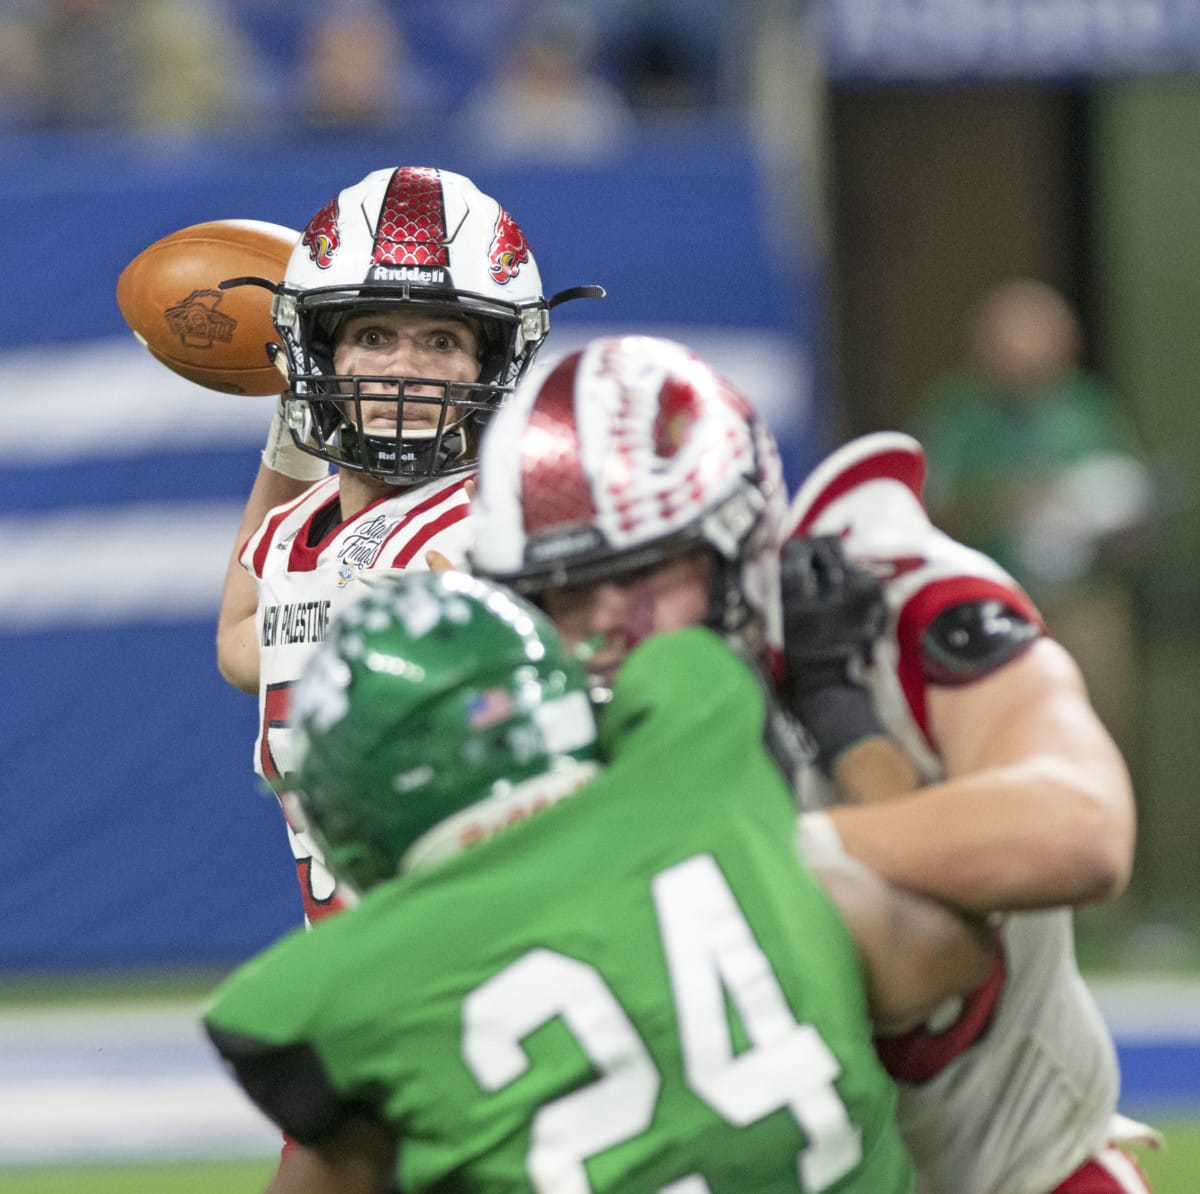 New Palestine's Eric Roudebush drops back to pass during the IHSAA 5A State Championship against Valparaiso on Friday, Nov. 29, 2019. (Tom Russo | Daily Reporter)